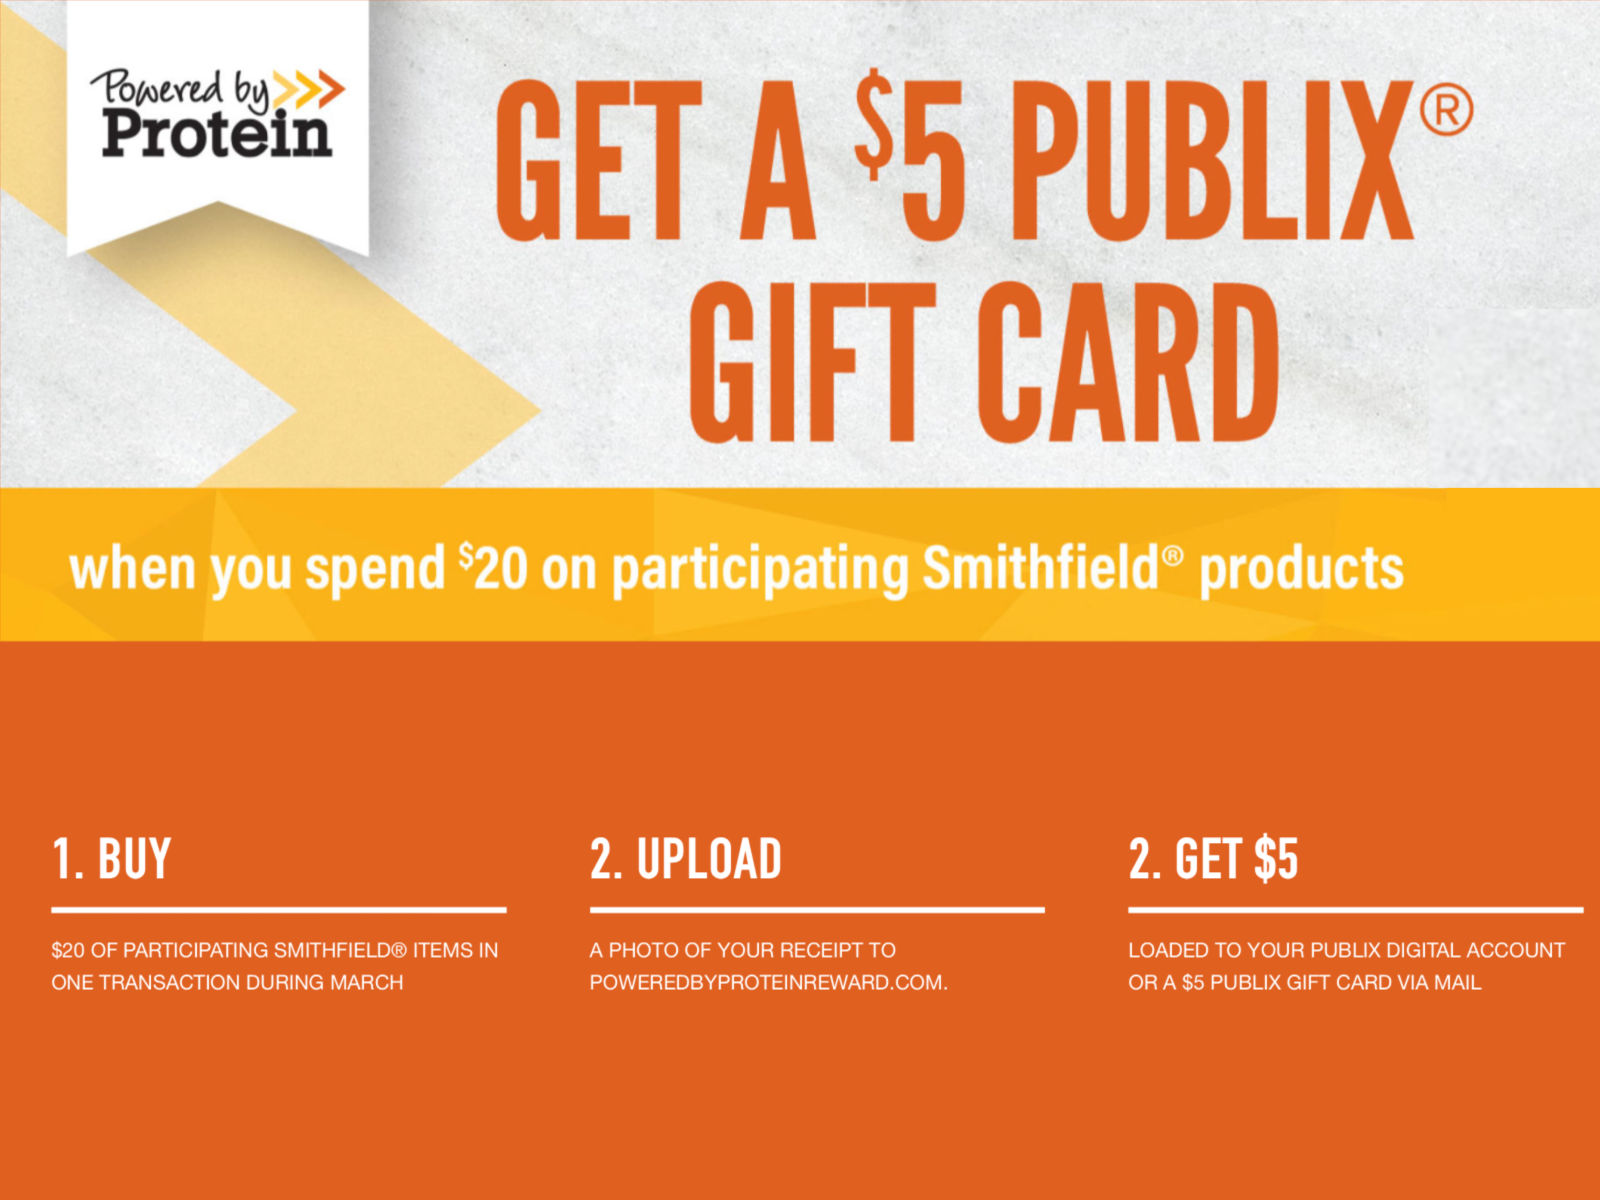 Celebrate Frozen Food Month & Earn A $5 Publix Gift Card With Your Smithfield Products Purchase on I Heart Publix 2